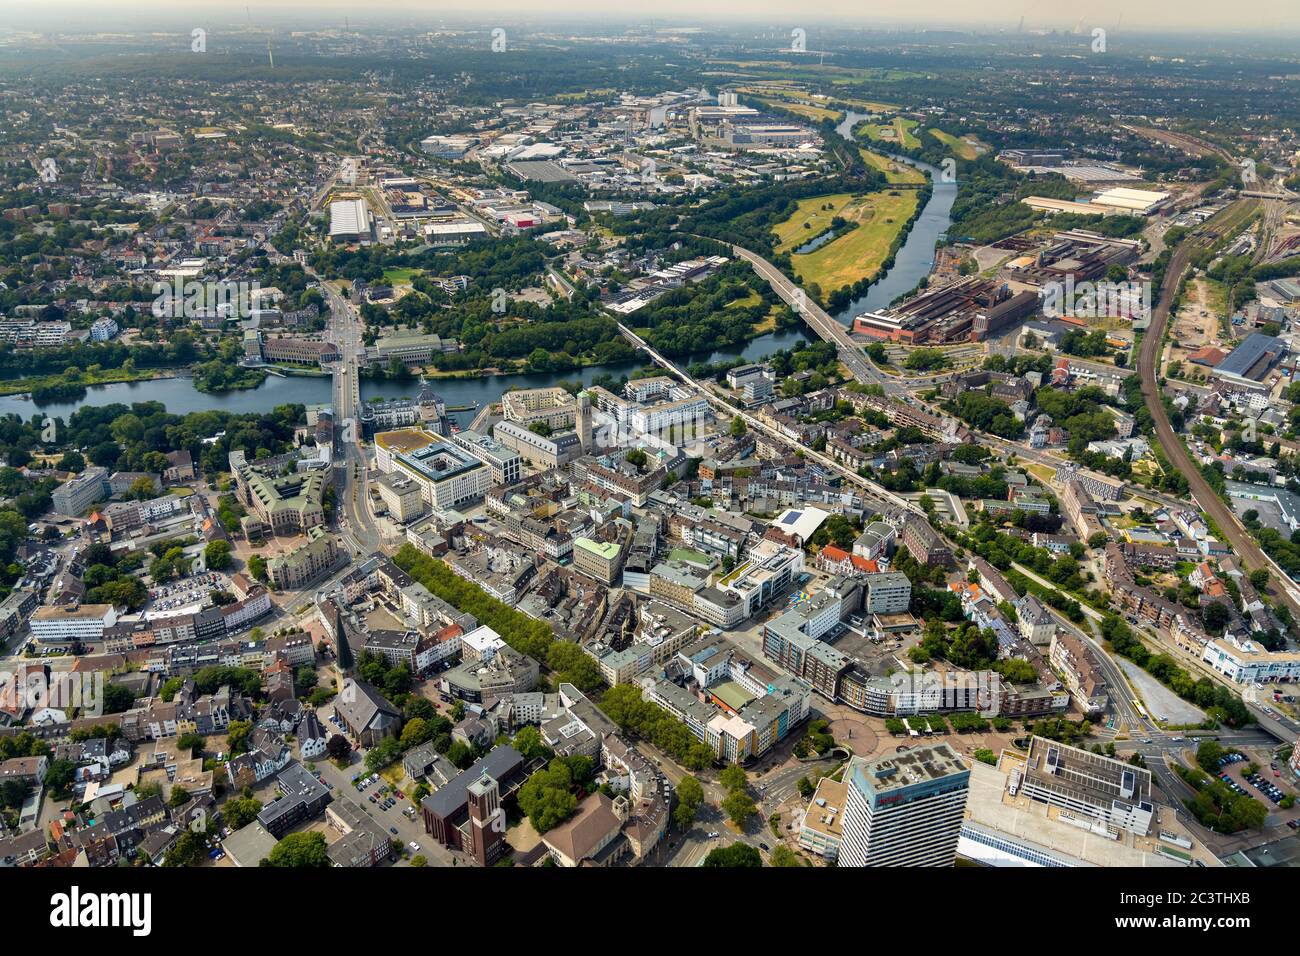 view of the old city, district Altstadt I, 21.07.2019, aerial view, Germany, North Rhine-Westphalia, Ruhr Area, Muelheim/Ruhr Stock Photo